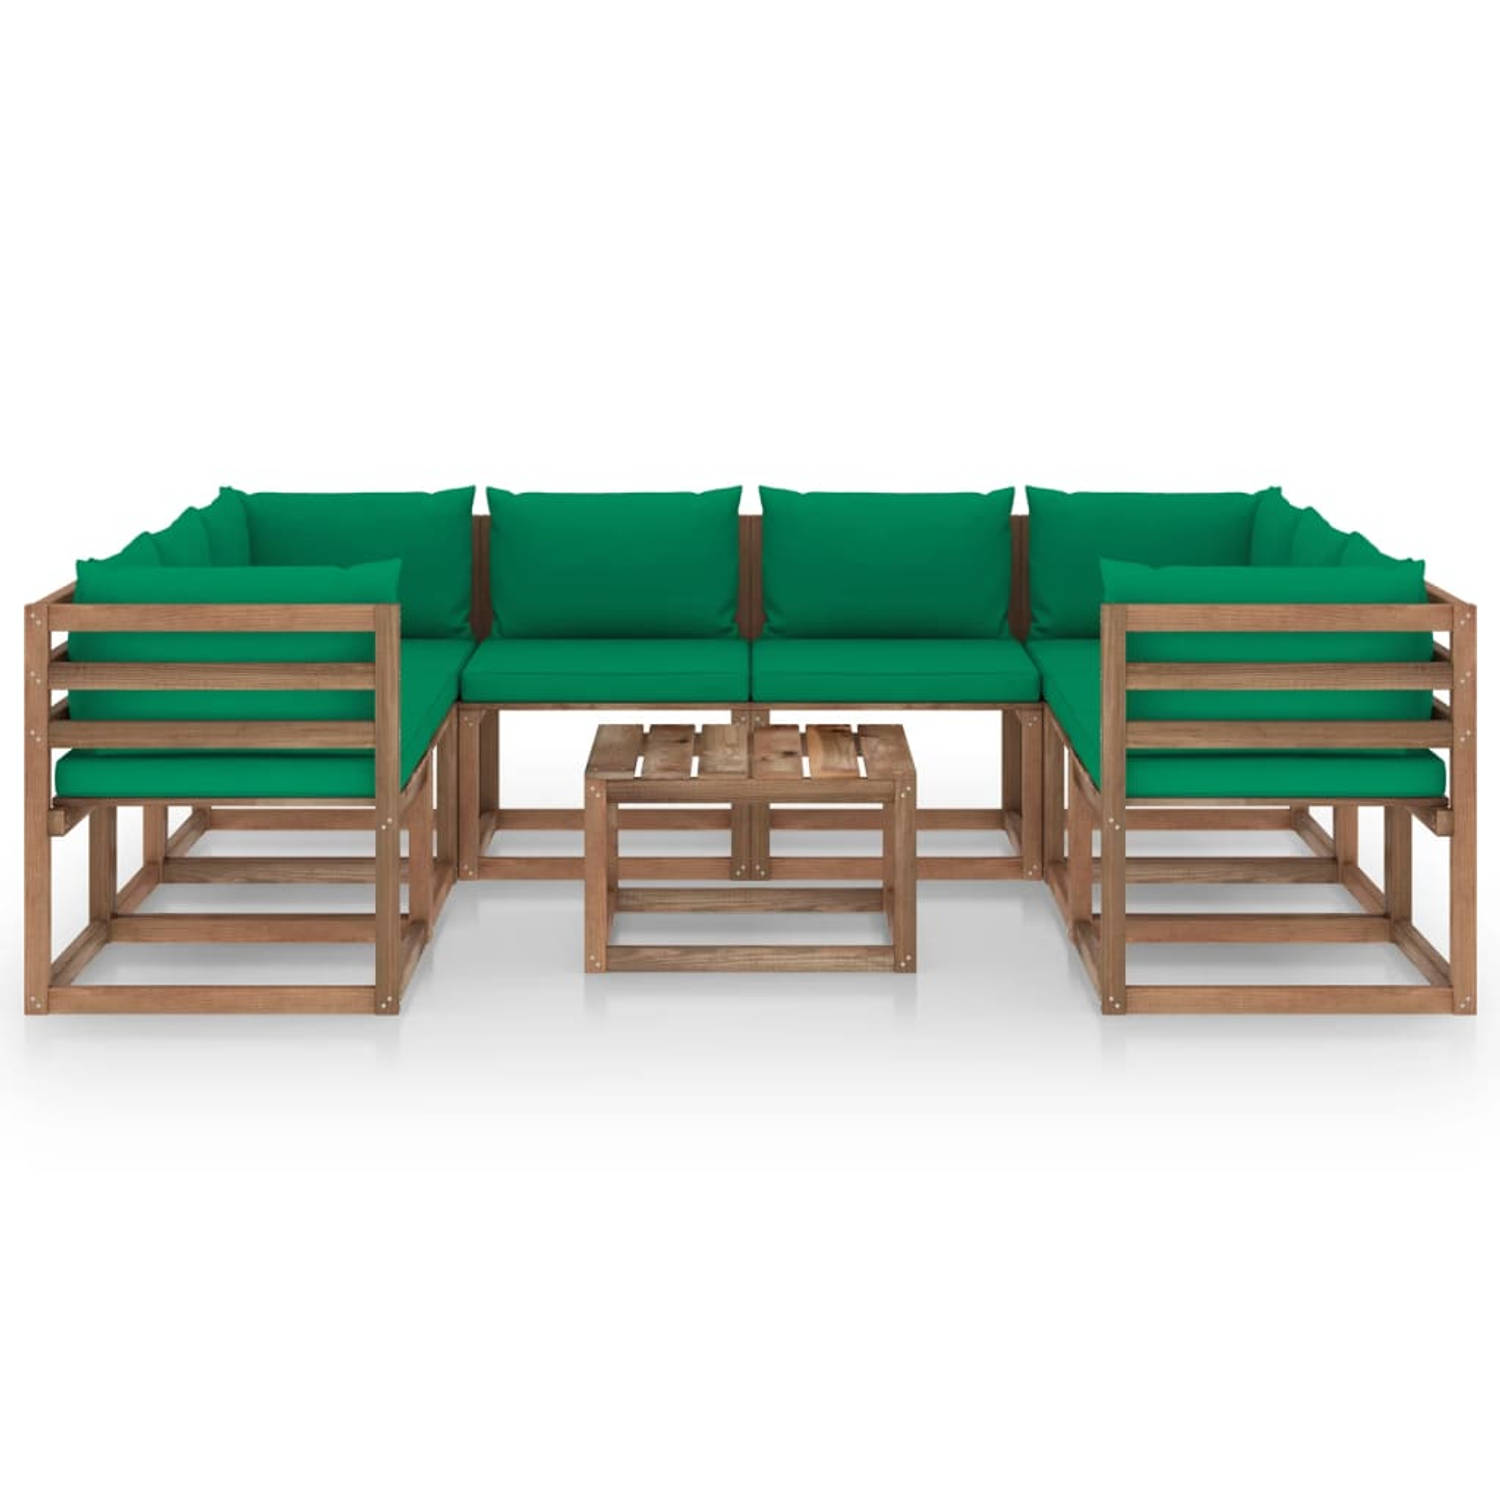 The Living Store Tuinset - Pallet - 64 x 64 x 70 cm - Groen